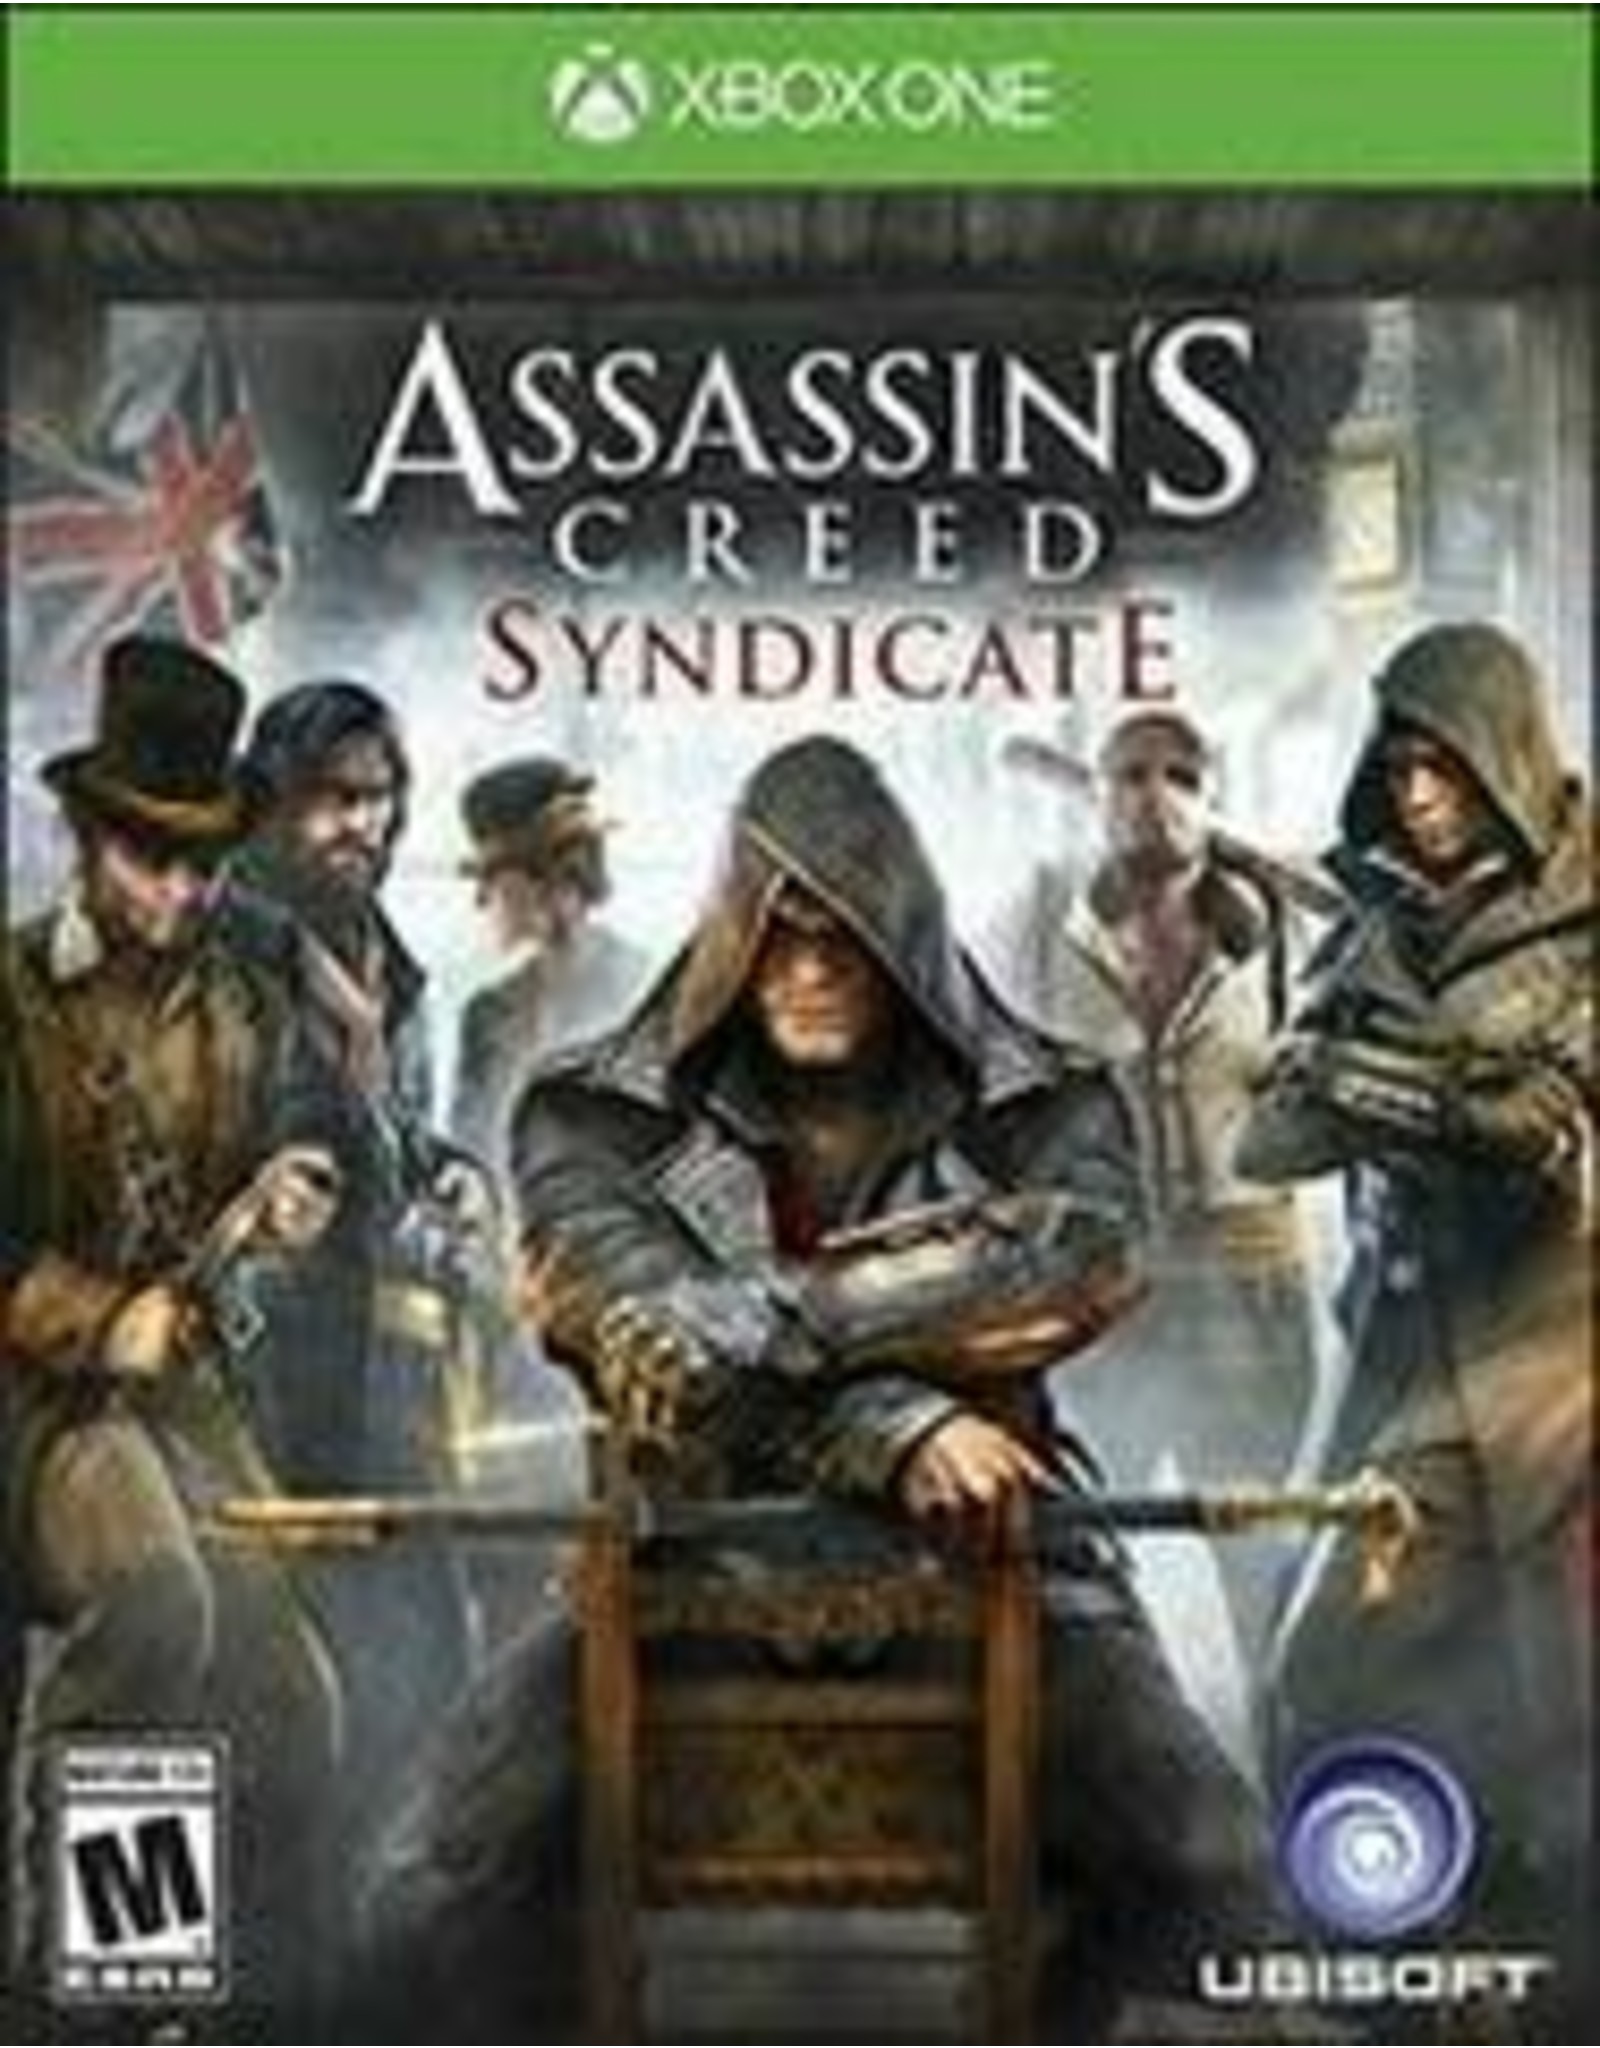 Xbox One Assassin's Creed Syndicate (CiB)